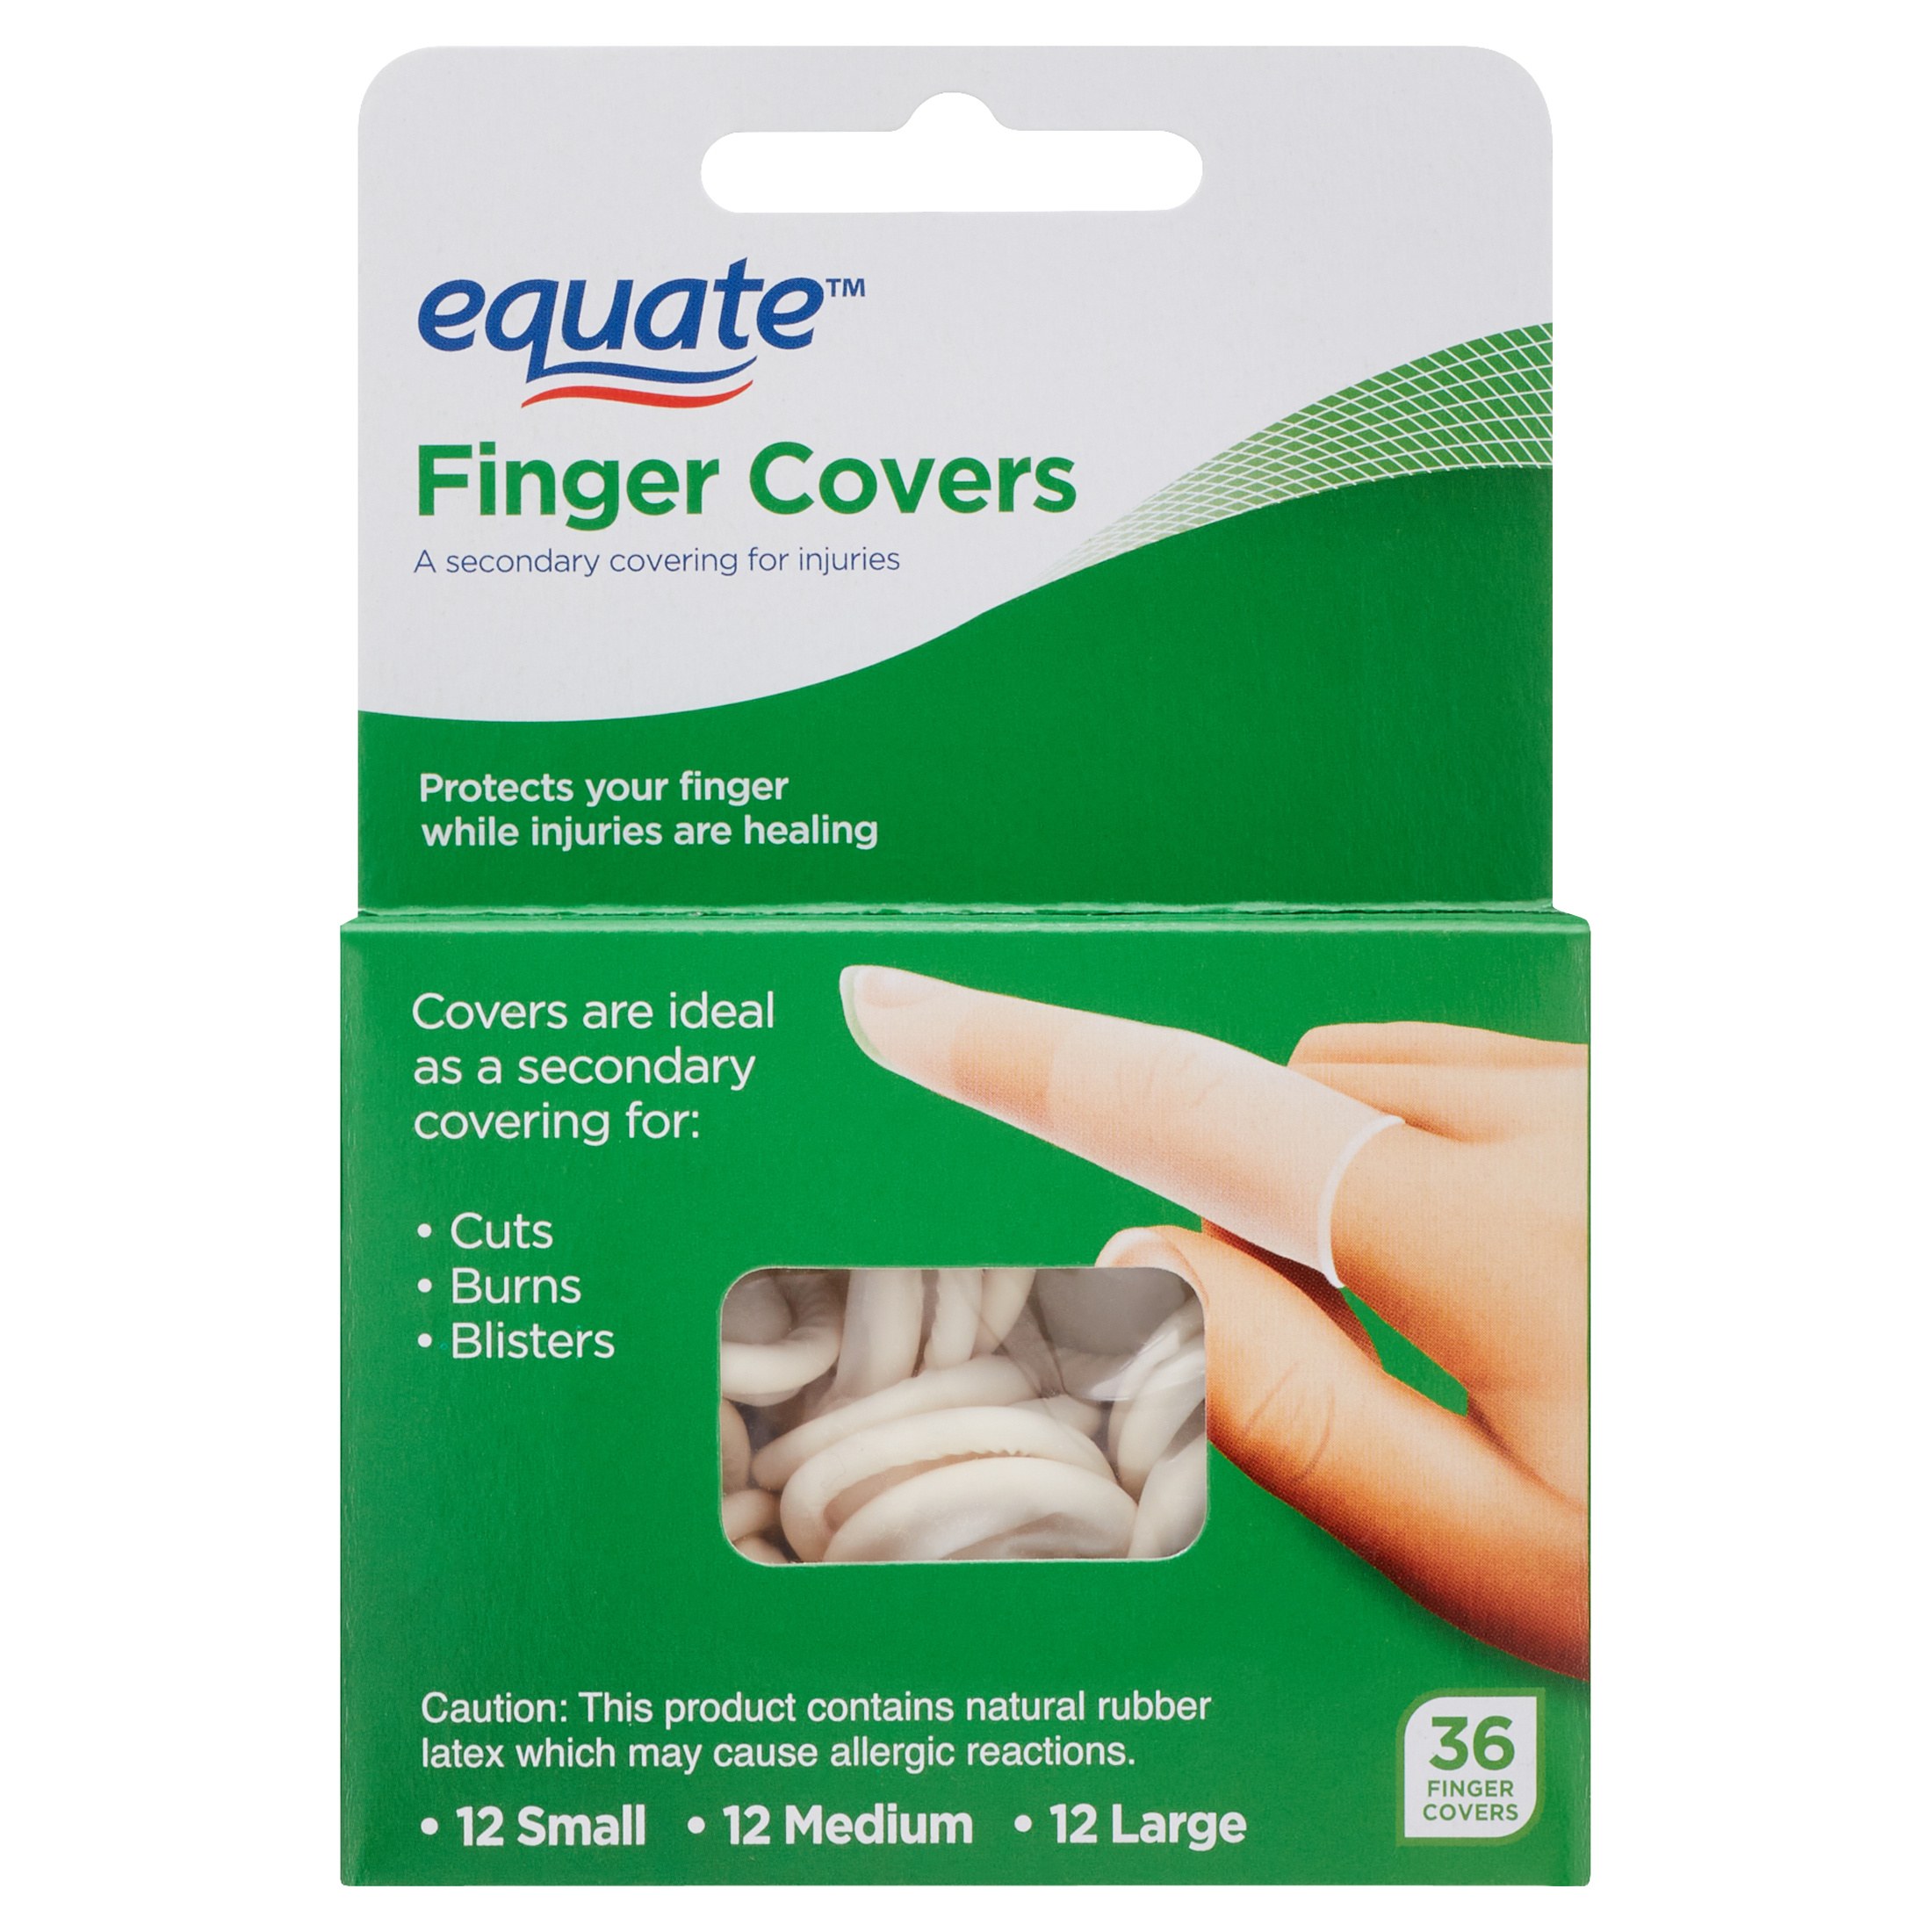 Equate Latex Finger Covers, 36 Count - image 1 of 8